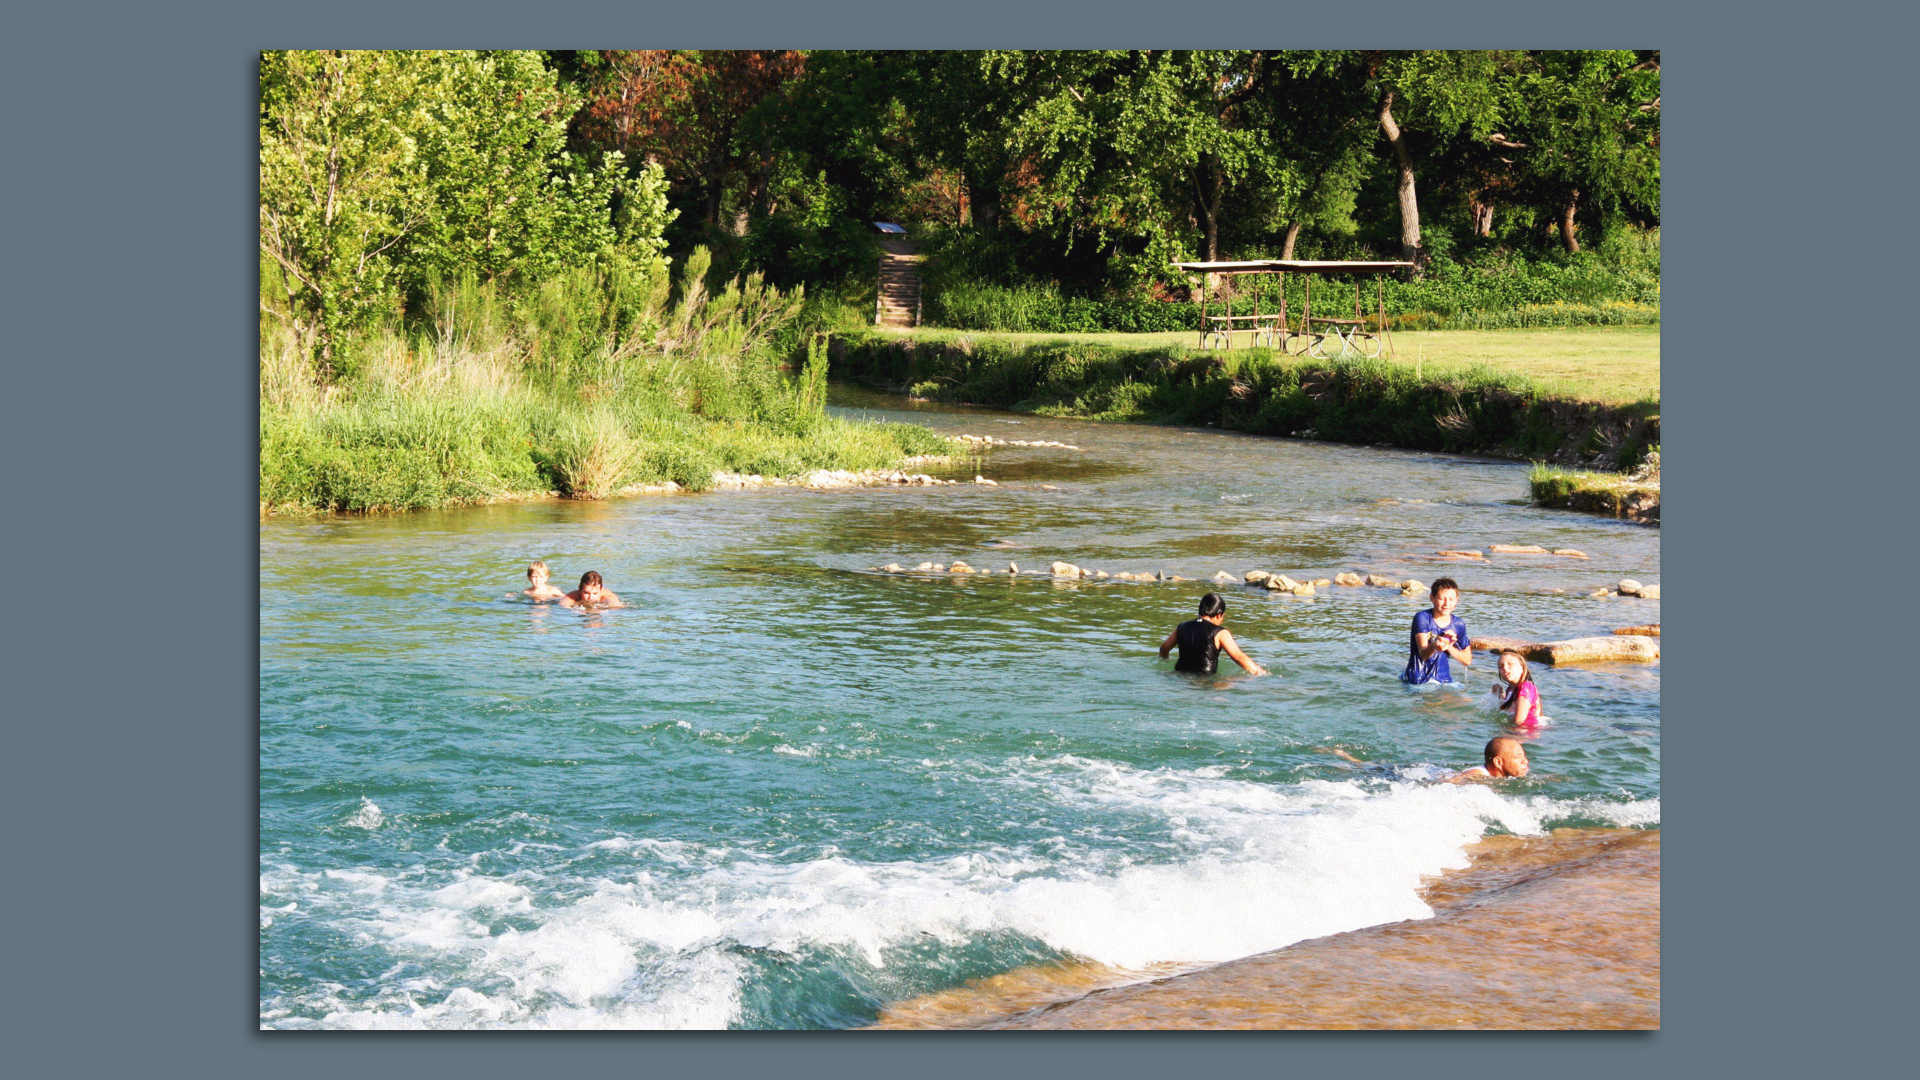 People playing in the South Llano River.